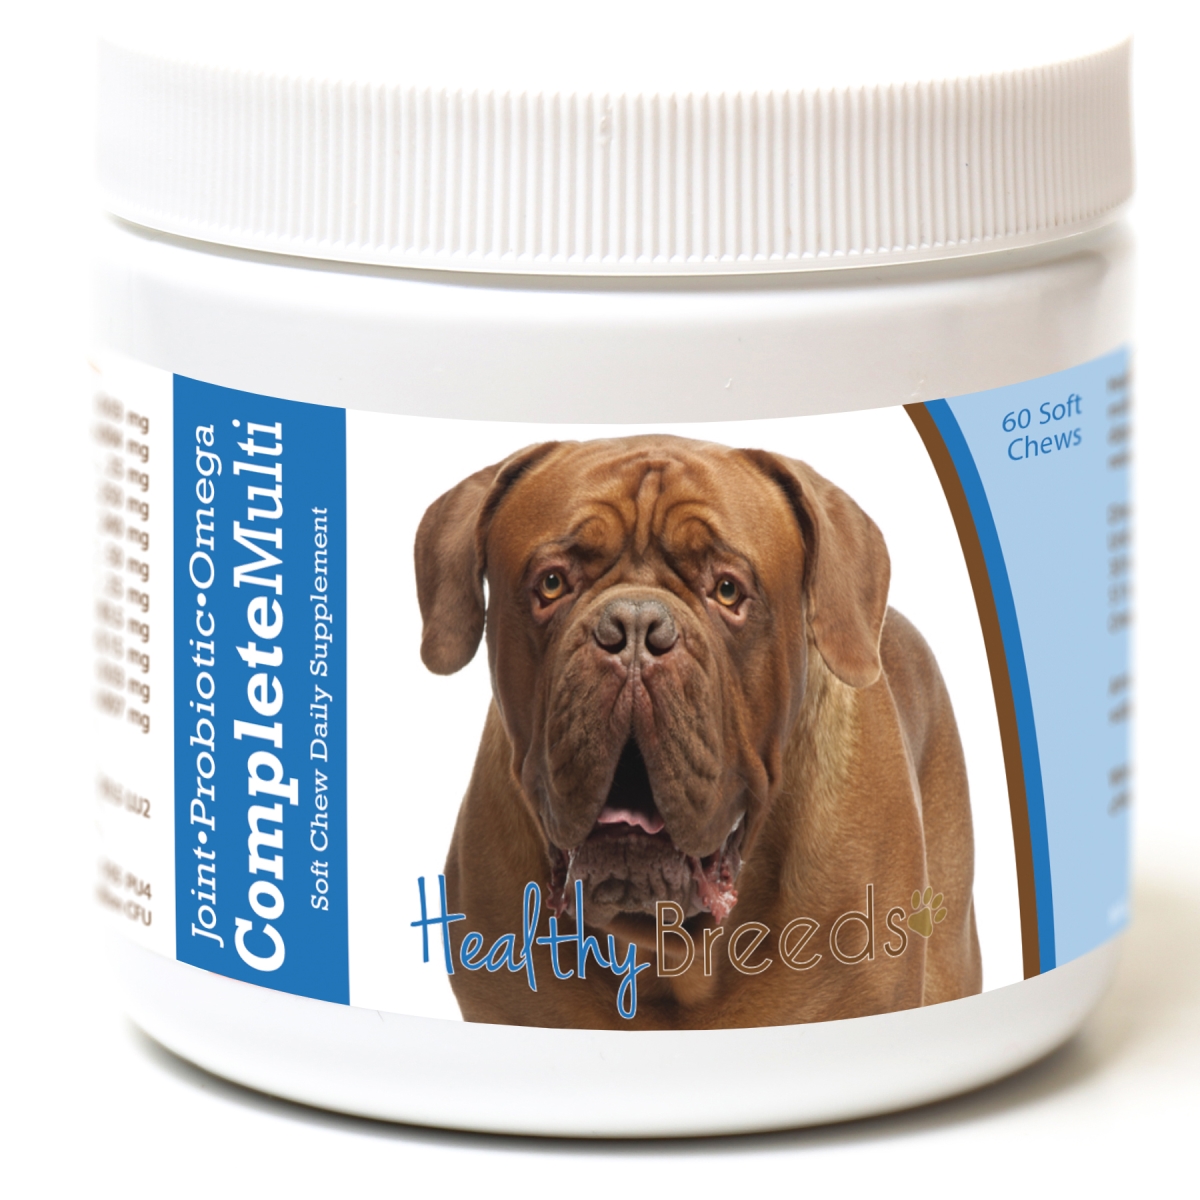 Picture of Healthy Breeds 192959007909 Dogue de Bordeaux All in One Multivitamin Soft Chew - 60 Count